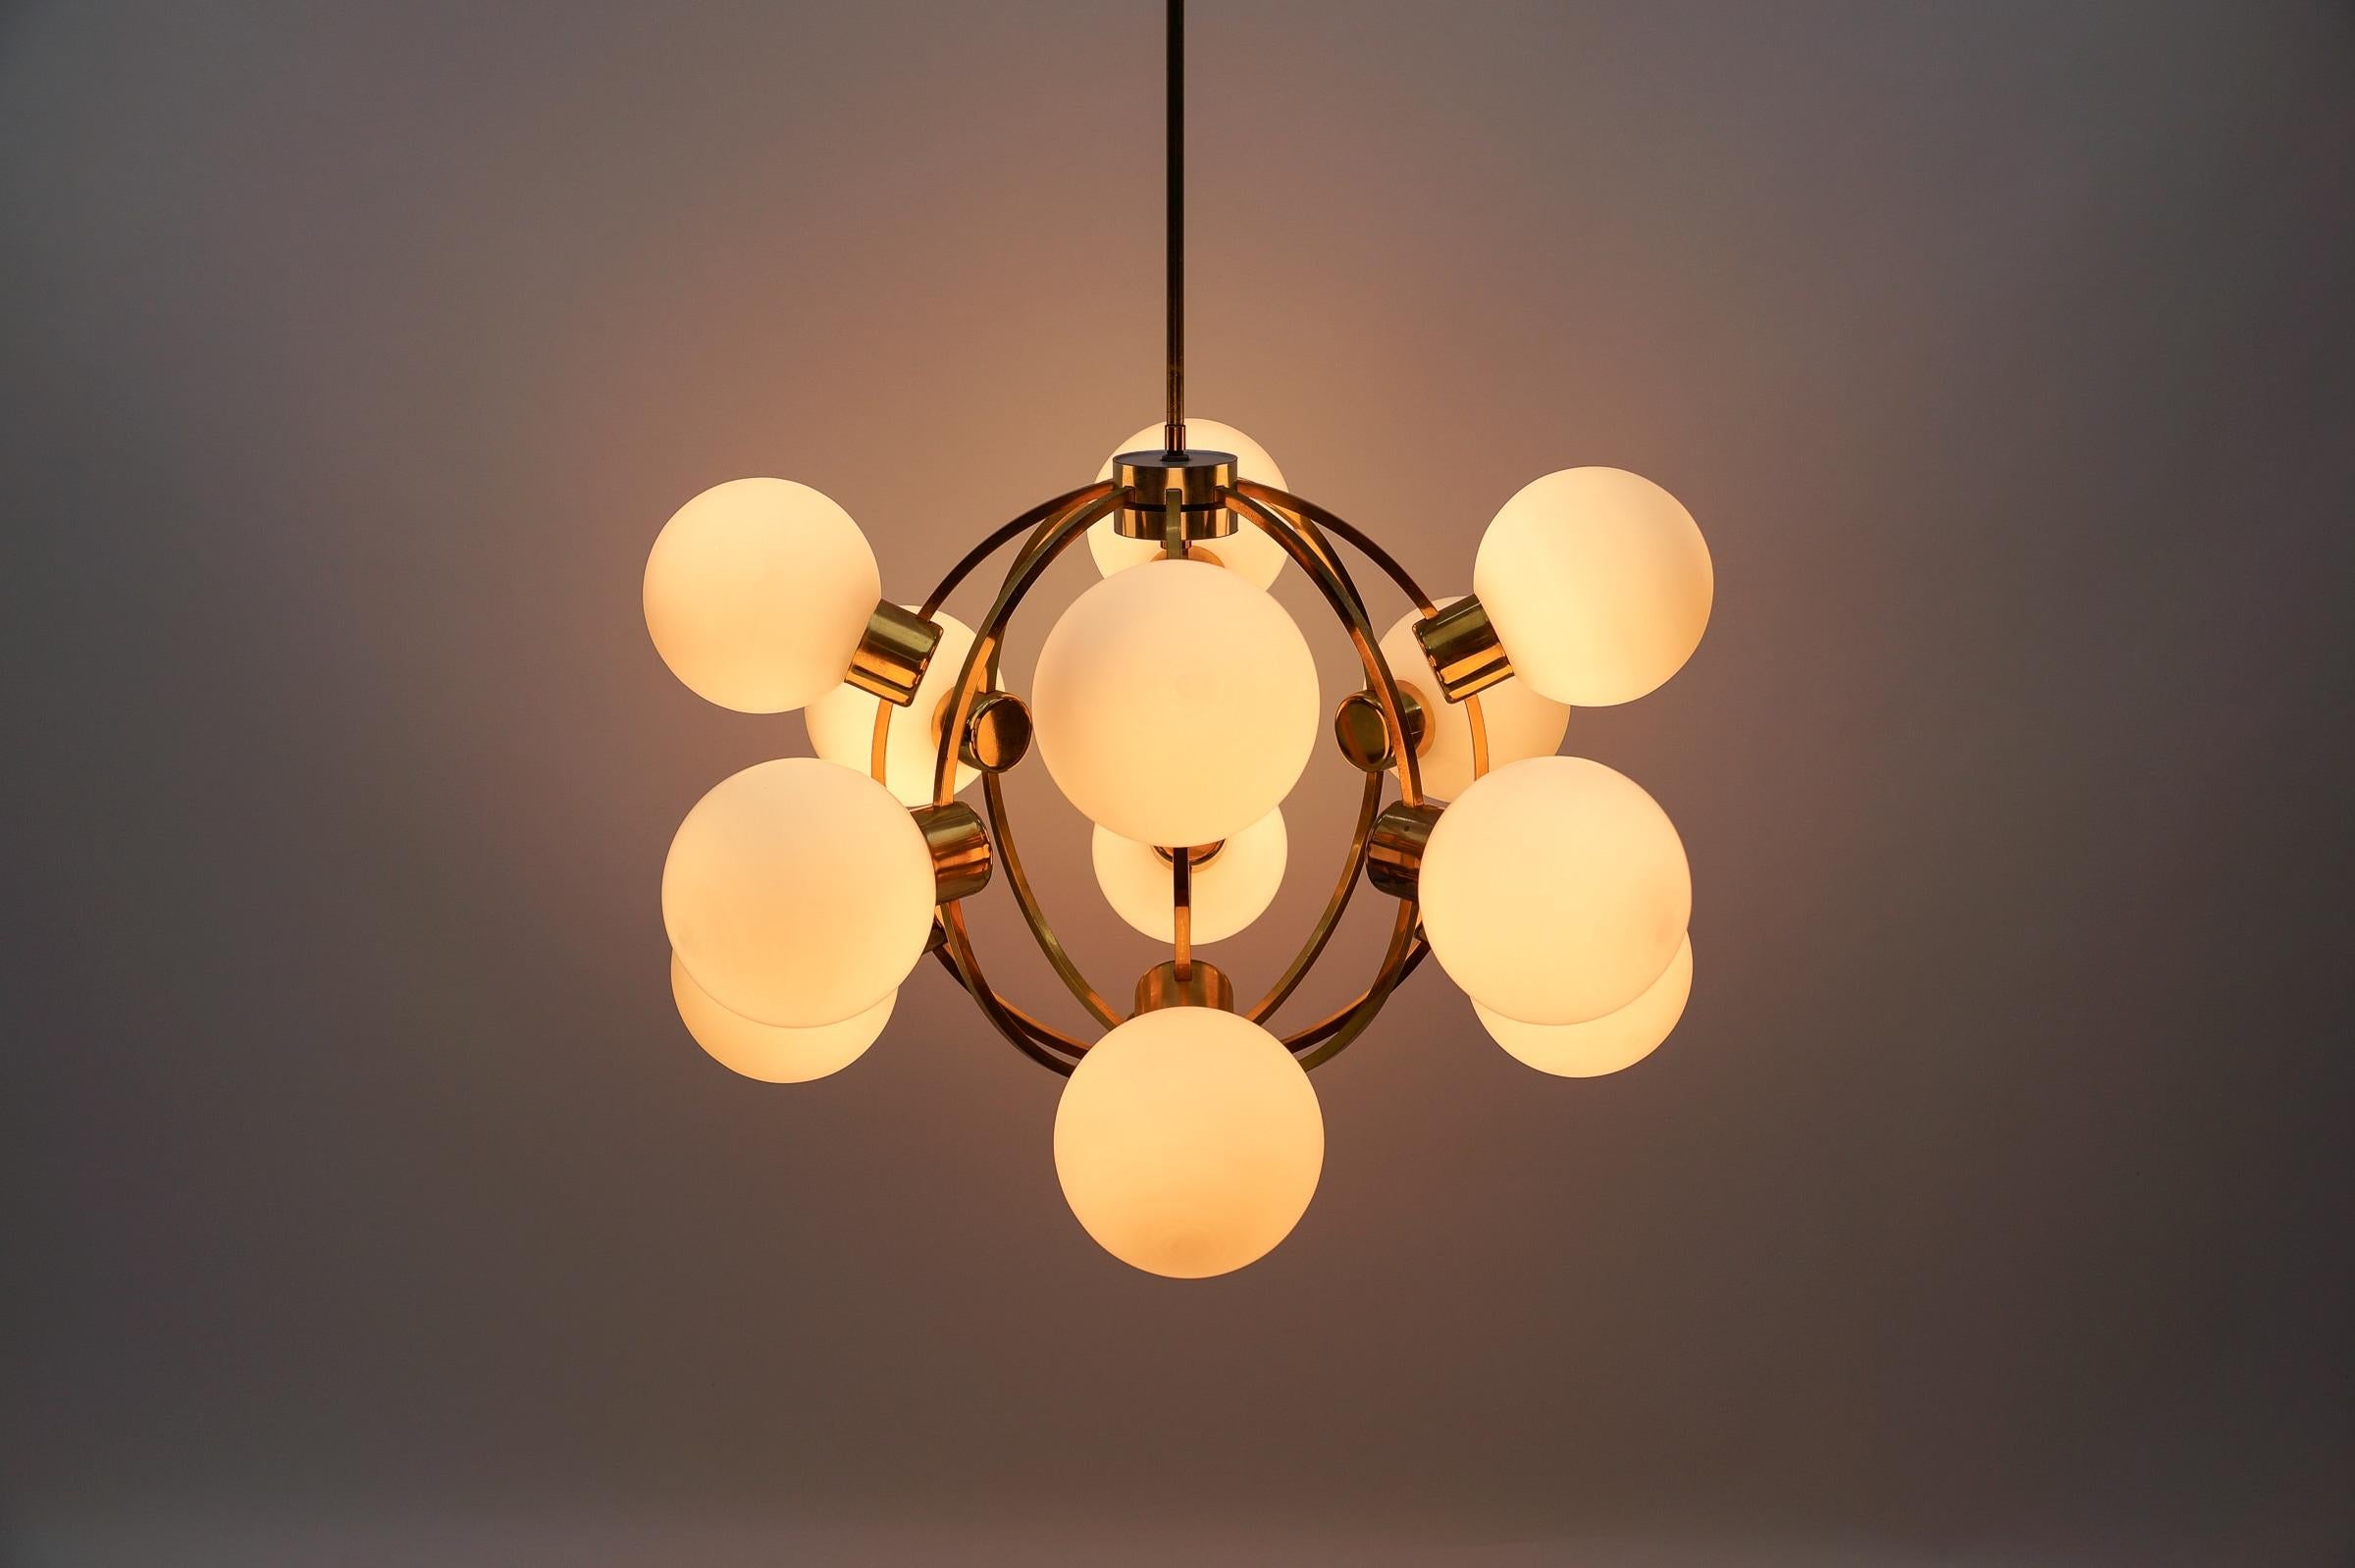 Large Mid-Century Modern Orbit or Sputnik Lamp with 12 Opaline Glass Balls In Good Condition For Sale In Nürnberg, Bayern